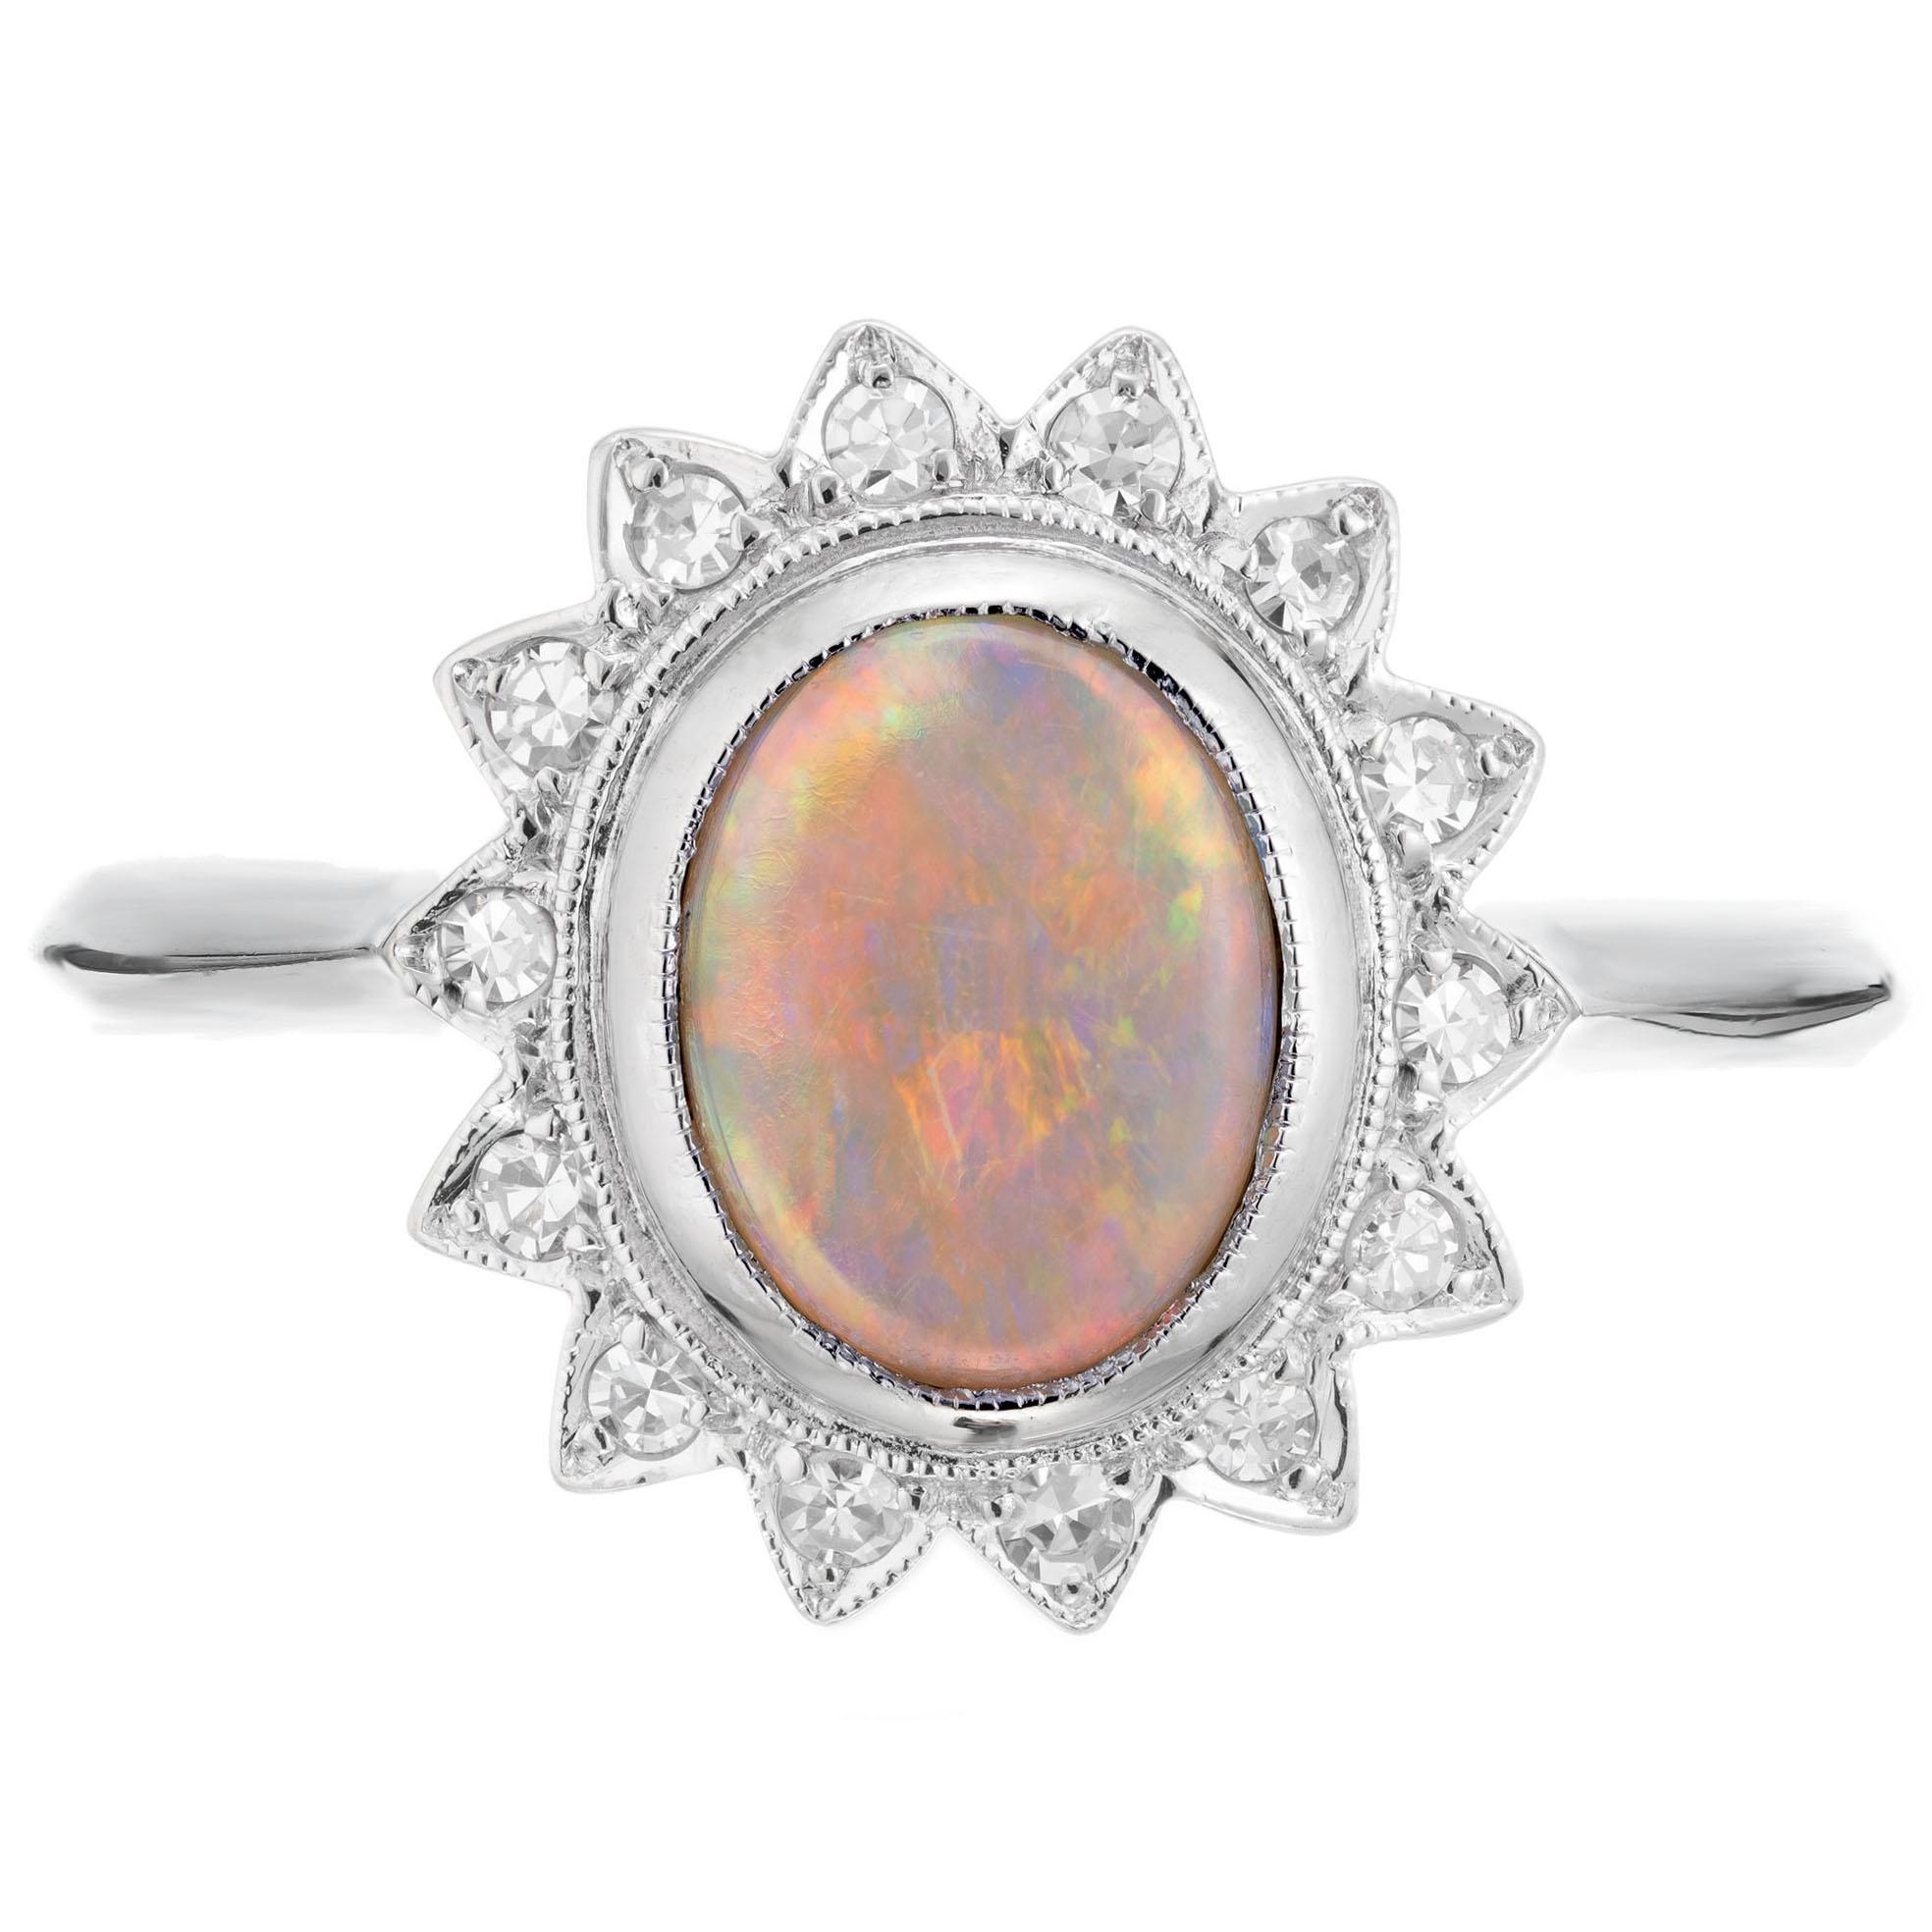 Mid-century 1950's opal and diamond ring. 14k white gold setting with a .85cts oval center opal and a halo of round cut diamonds. The opal has flashes of red, orange, blue and green.

1 oval fine blue, green, orange, and red Opal, approx. total